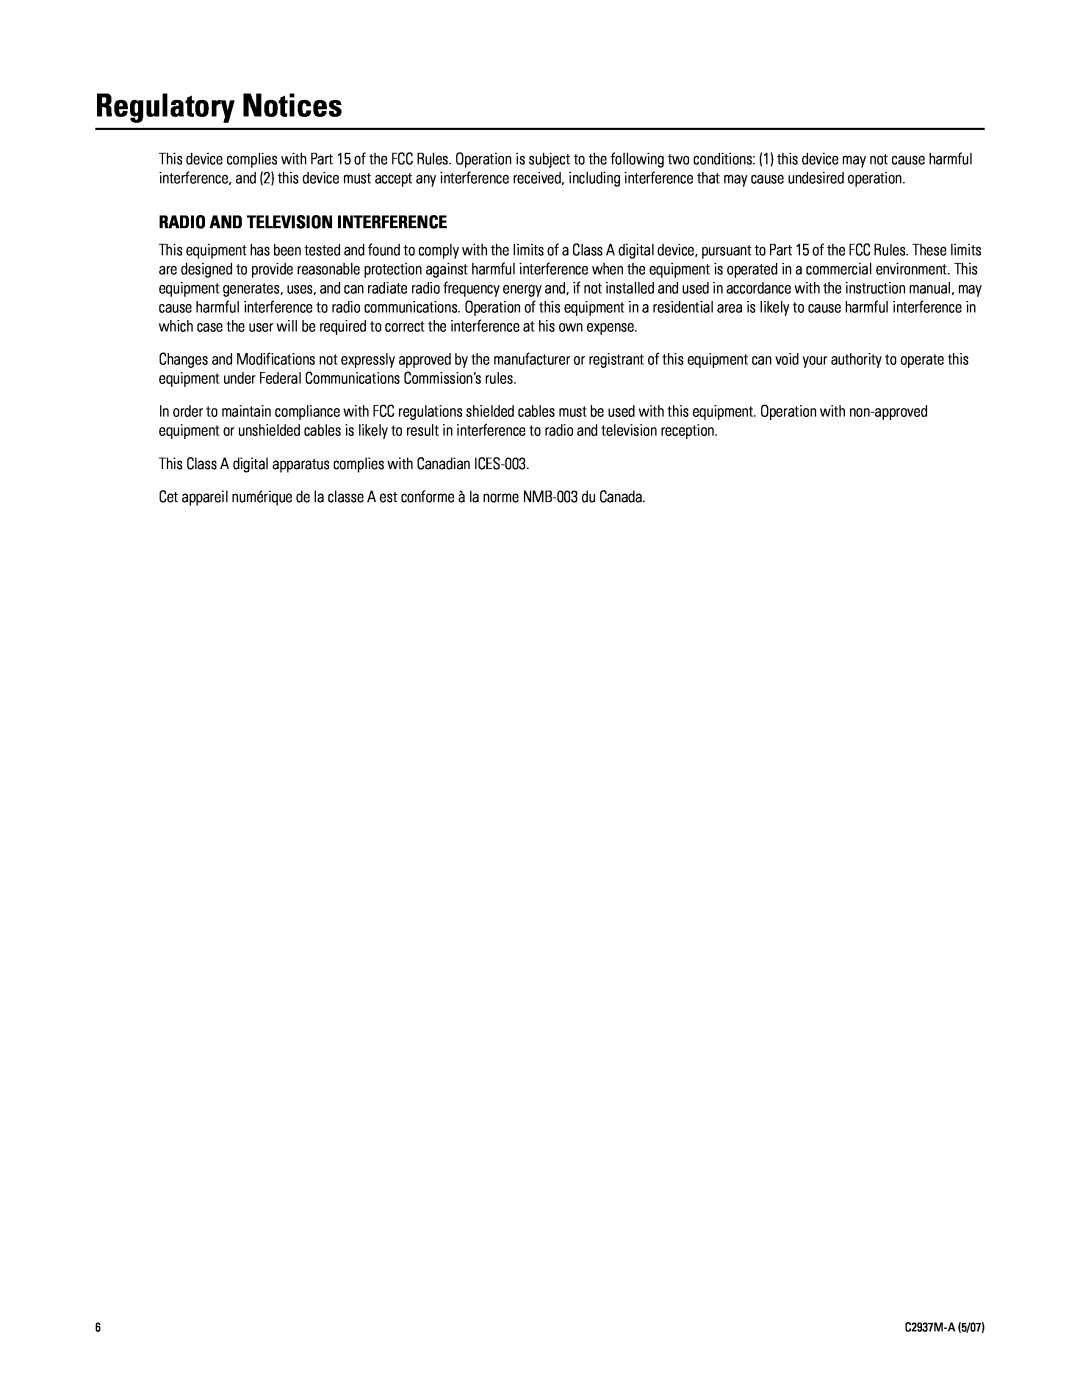 Pelco 500 Series manual Regulatory Notices, Radio And Television Interference 